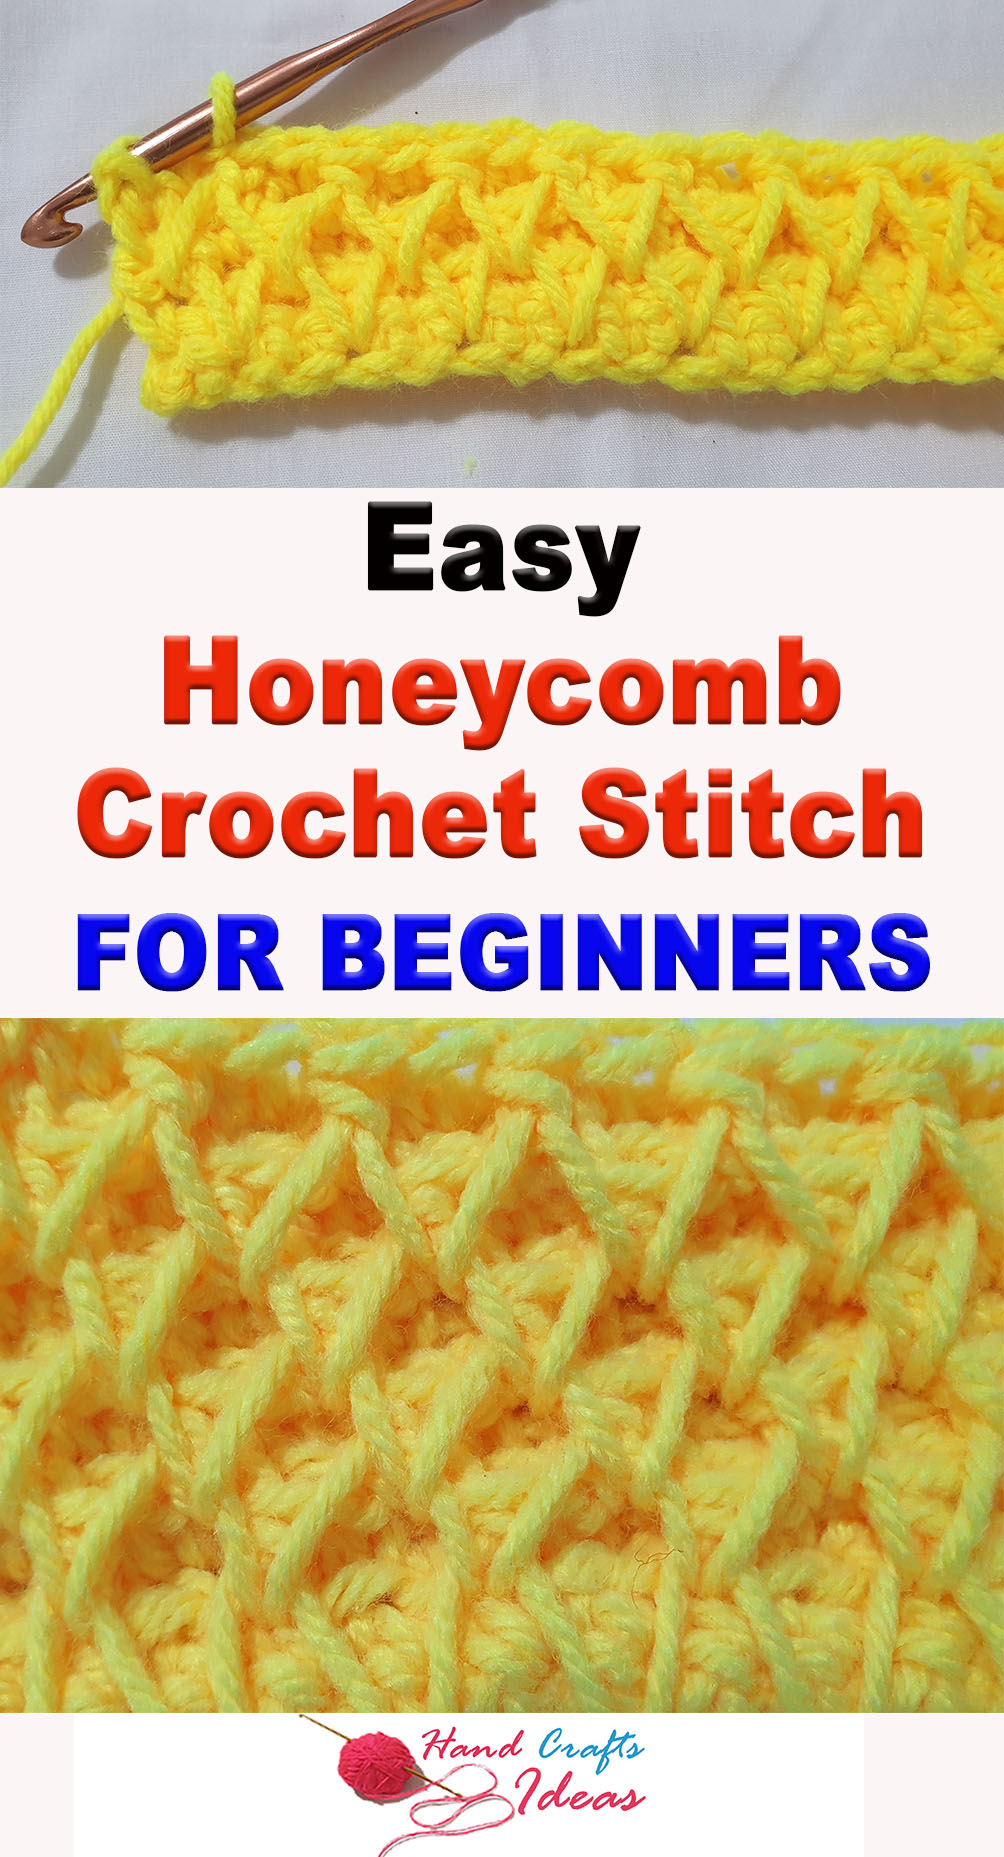 Easy Honeycomb Crochet Stitch FOR BEGINNERS